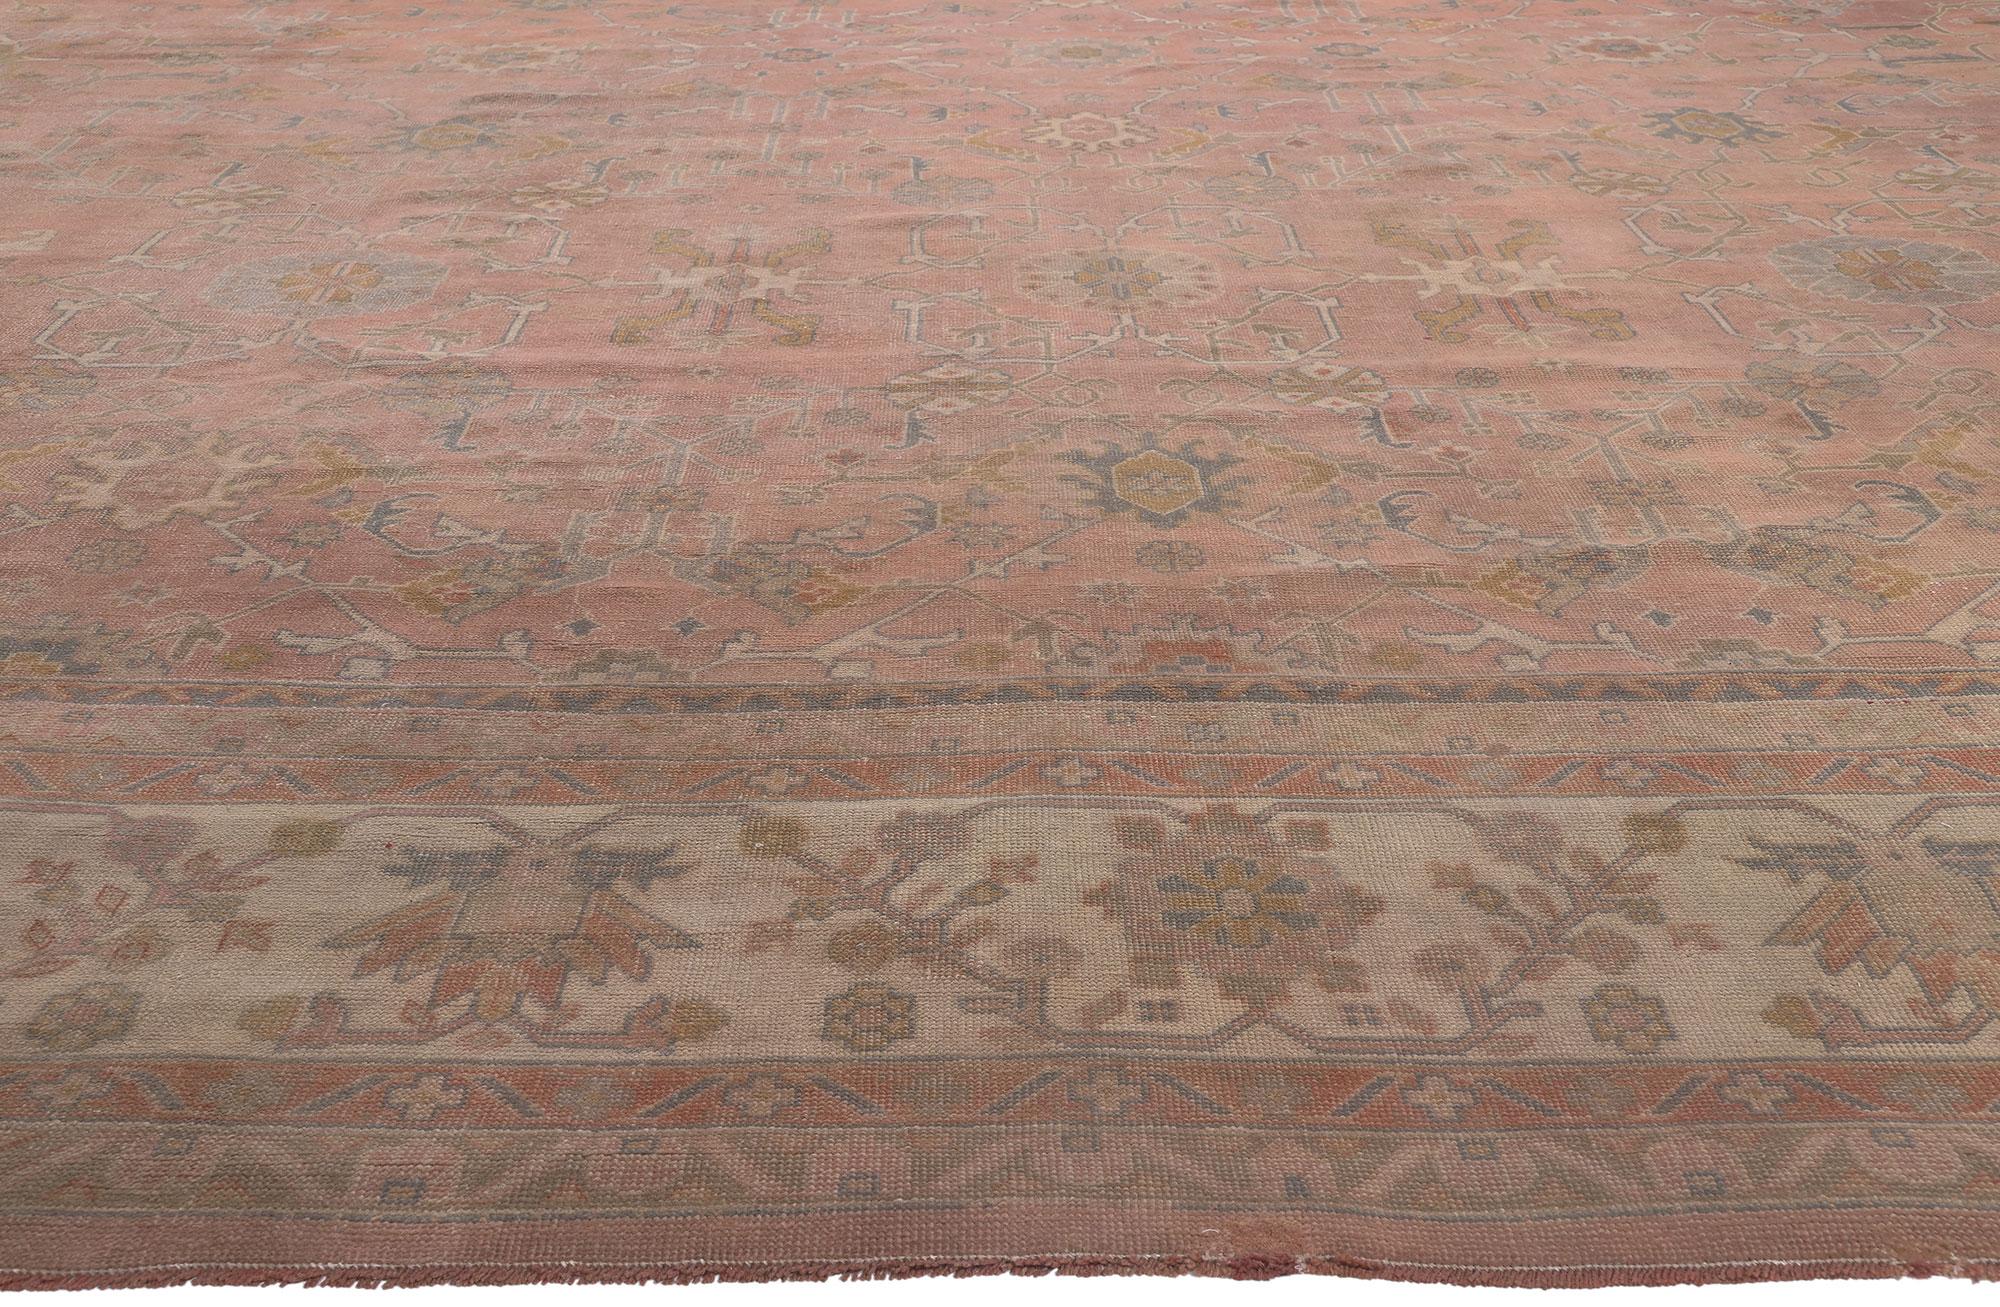 Oversized Antique Turkish Pink Oushak Rug, Hotel Lobby Size Carpet In Good Condition For Sale In Dallas, TX